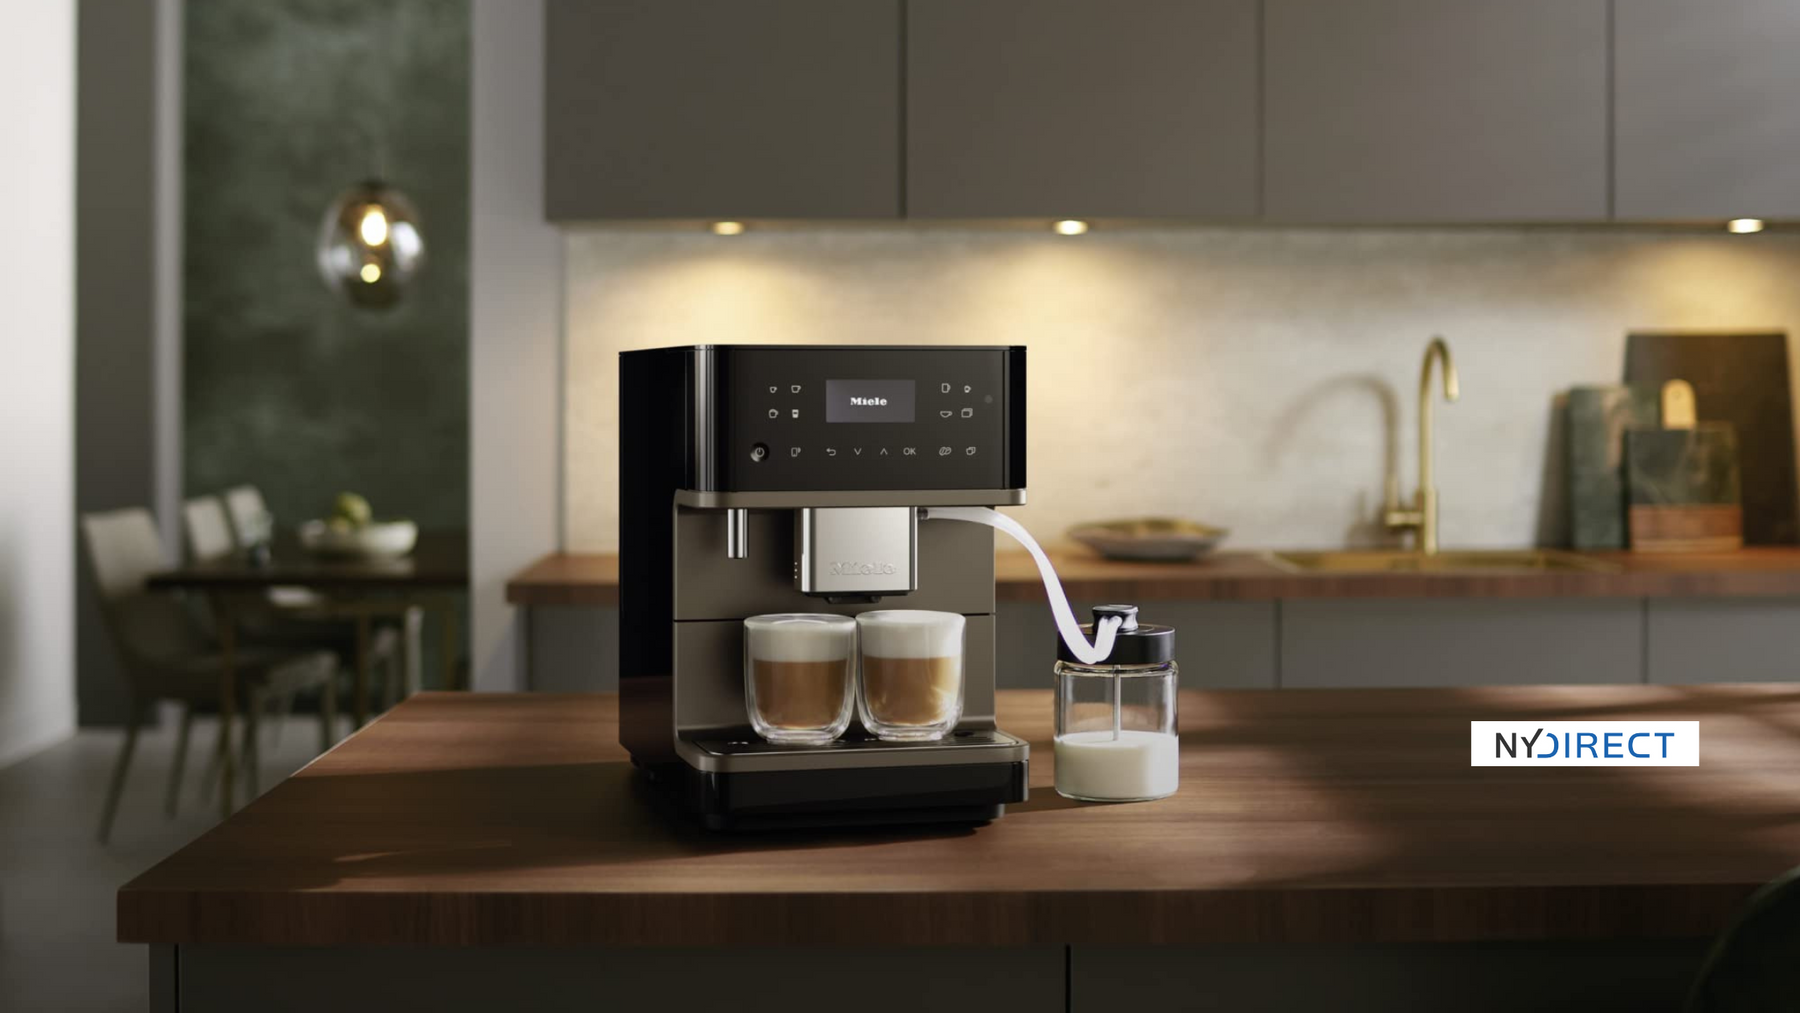 The Miele Cm 6360 Milkperfection Countertop Coffee Machine - NYDIRECT